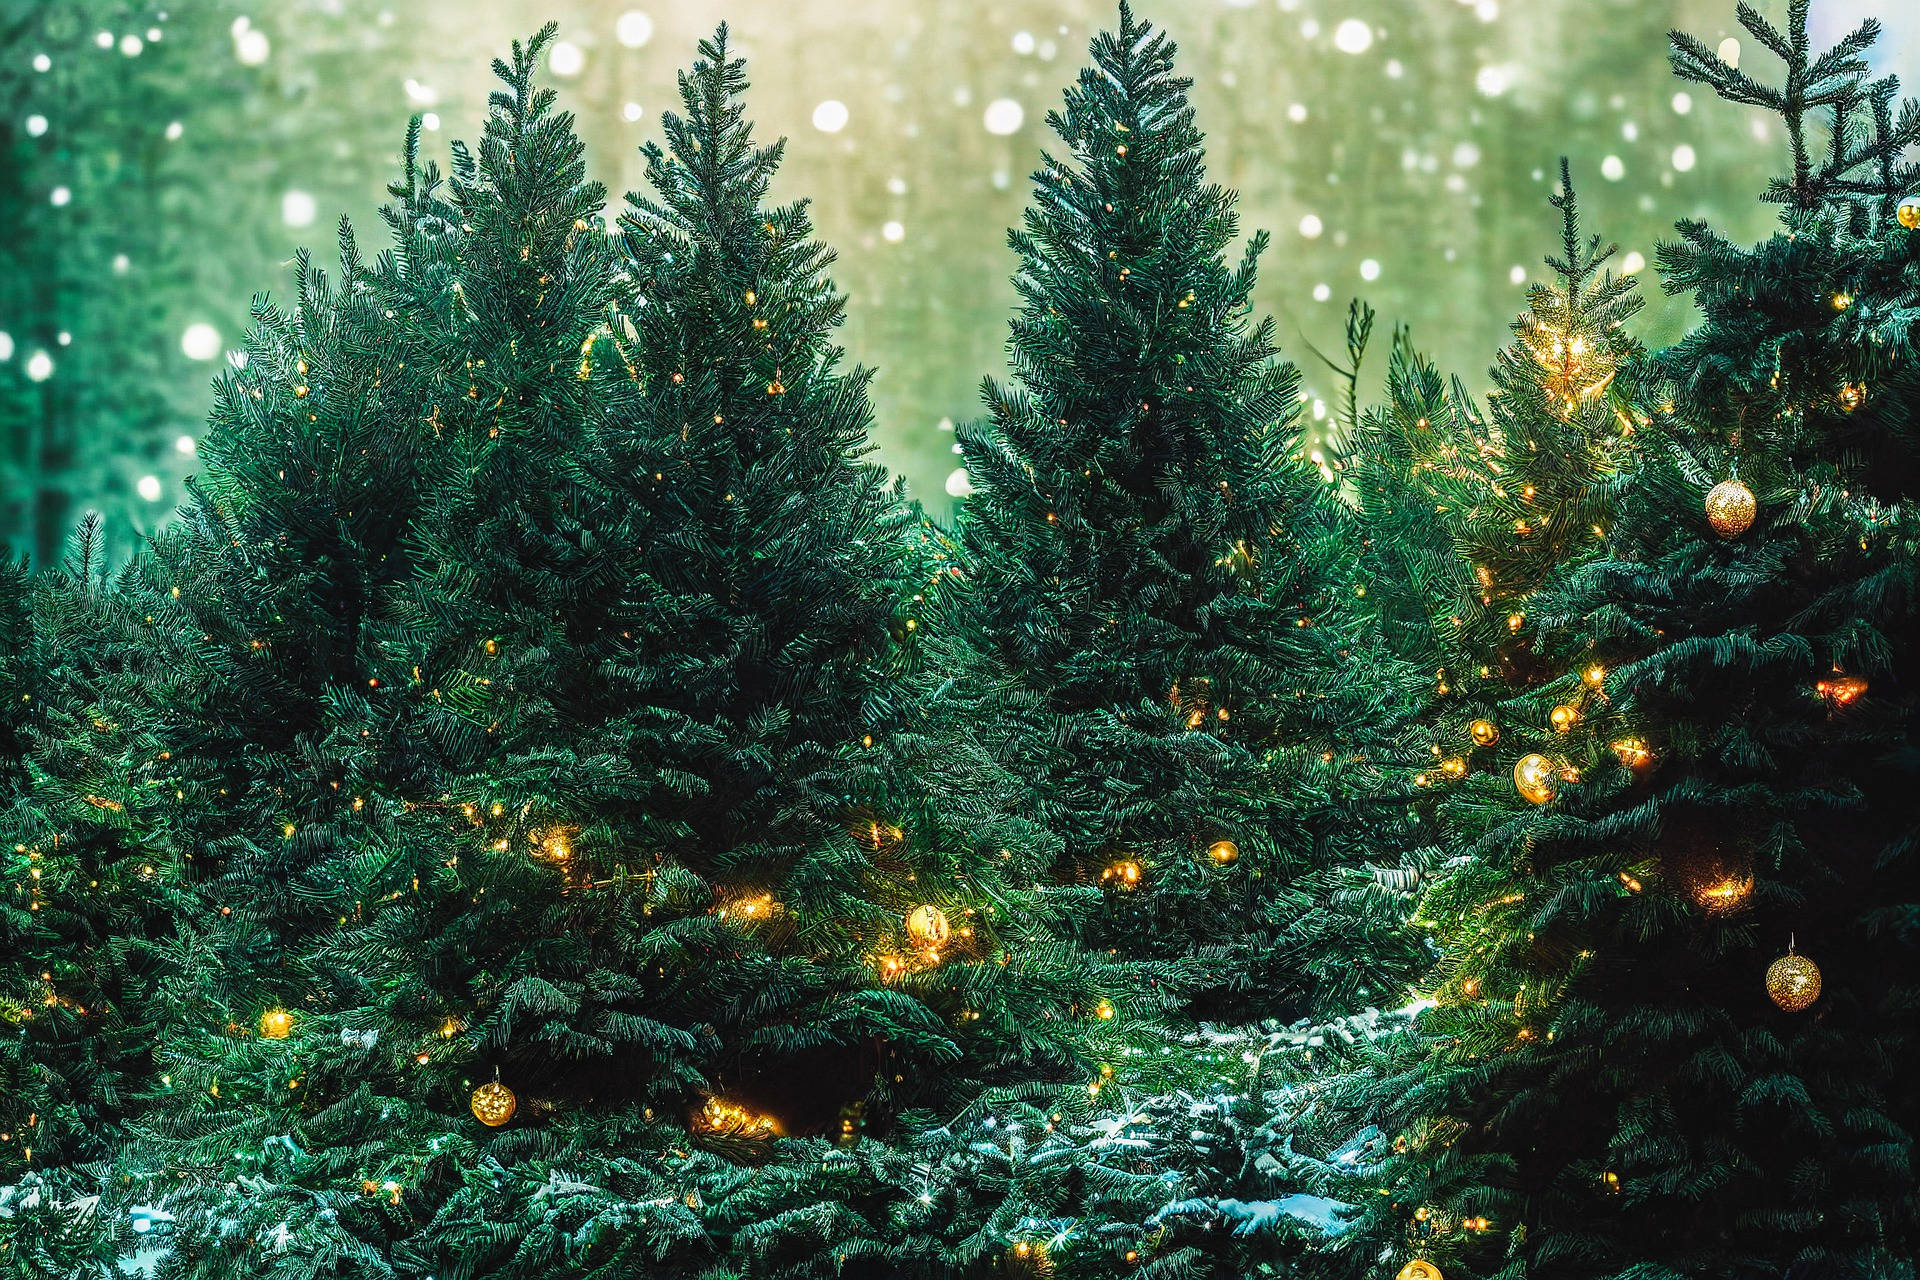 Lush Green Trees In Christmas Forest Wallpaper